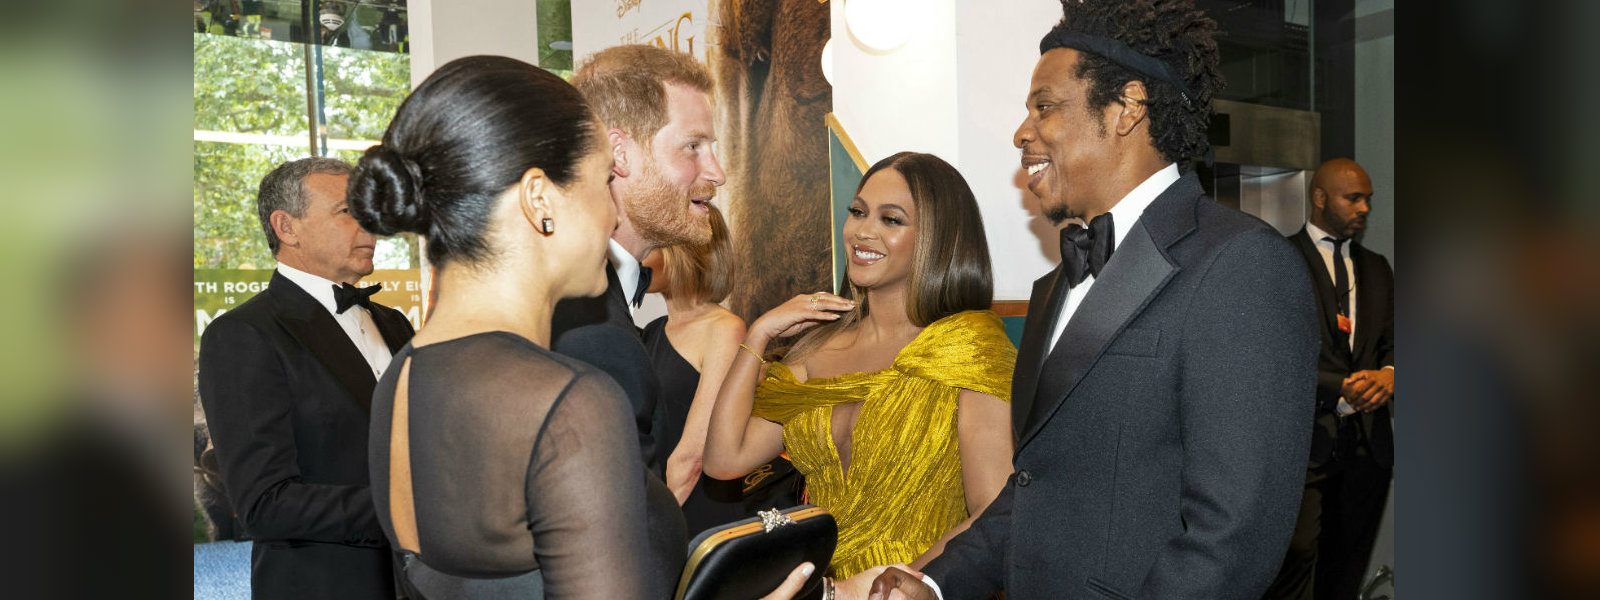 Meghan Markle meets Beyonce and Jay-Z